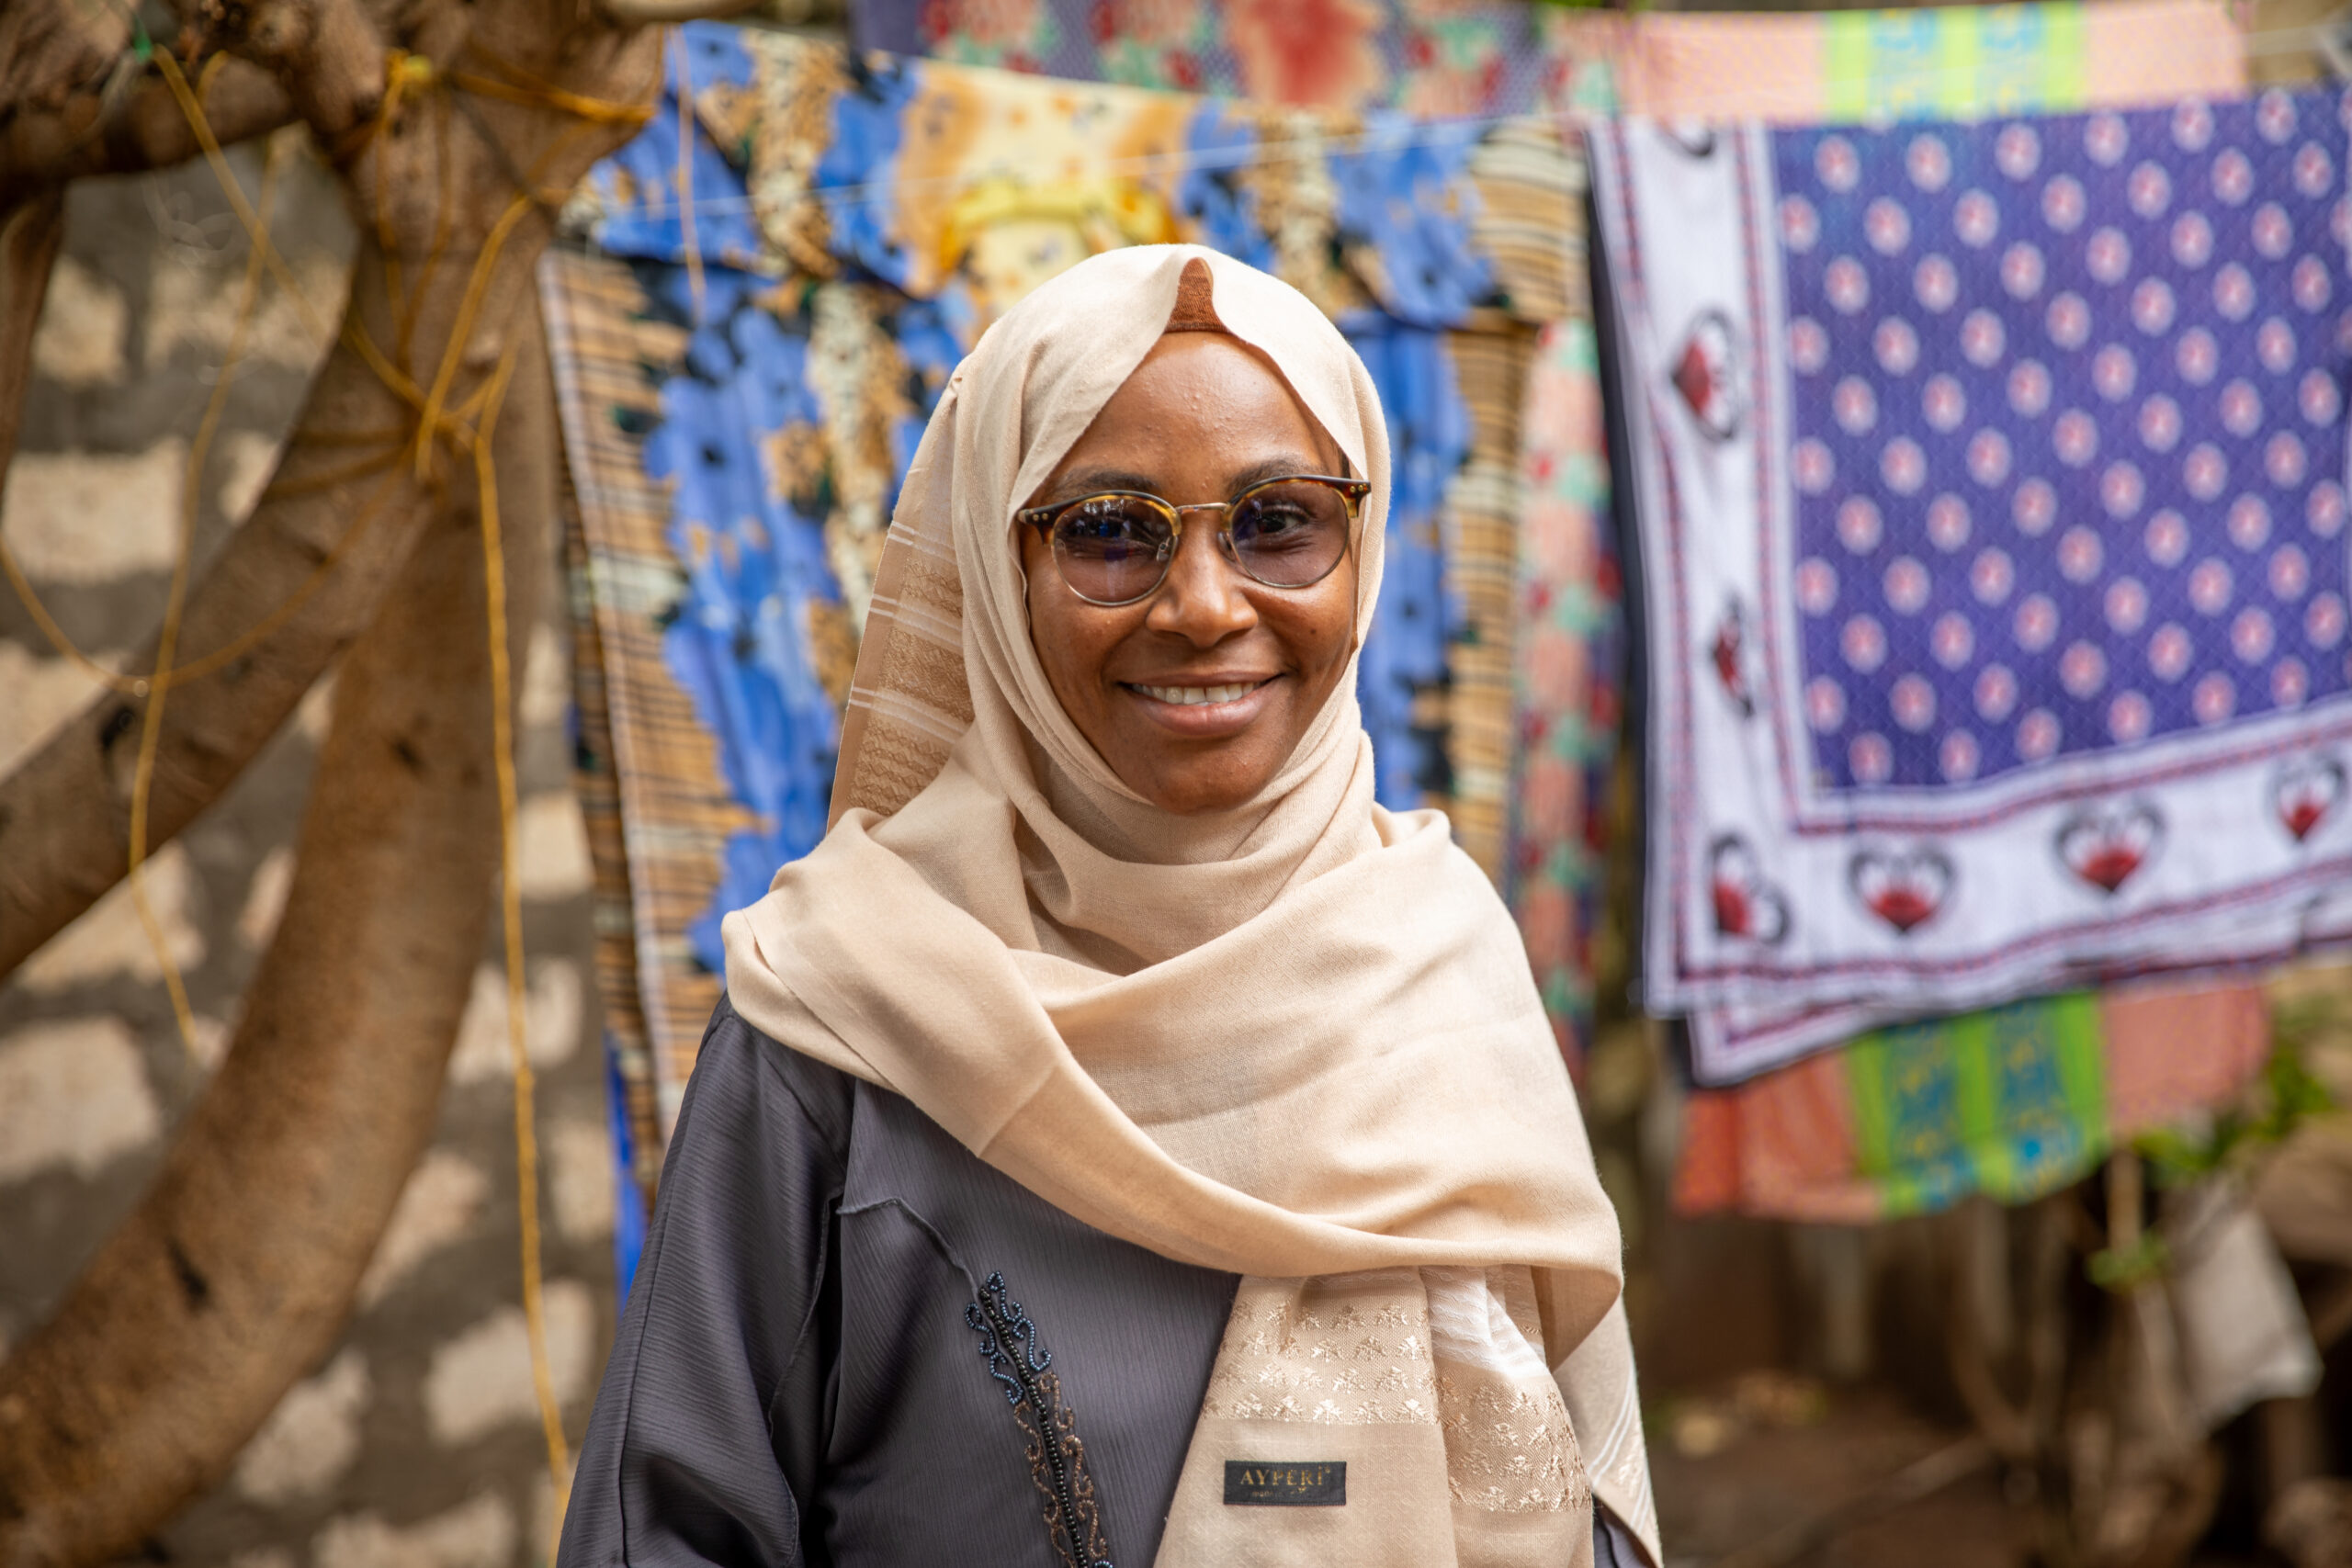 Portrait of a woman wearing glasses and a headscarf.